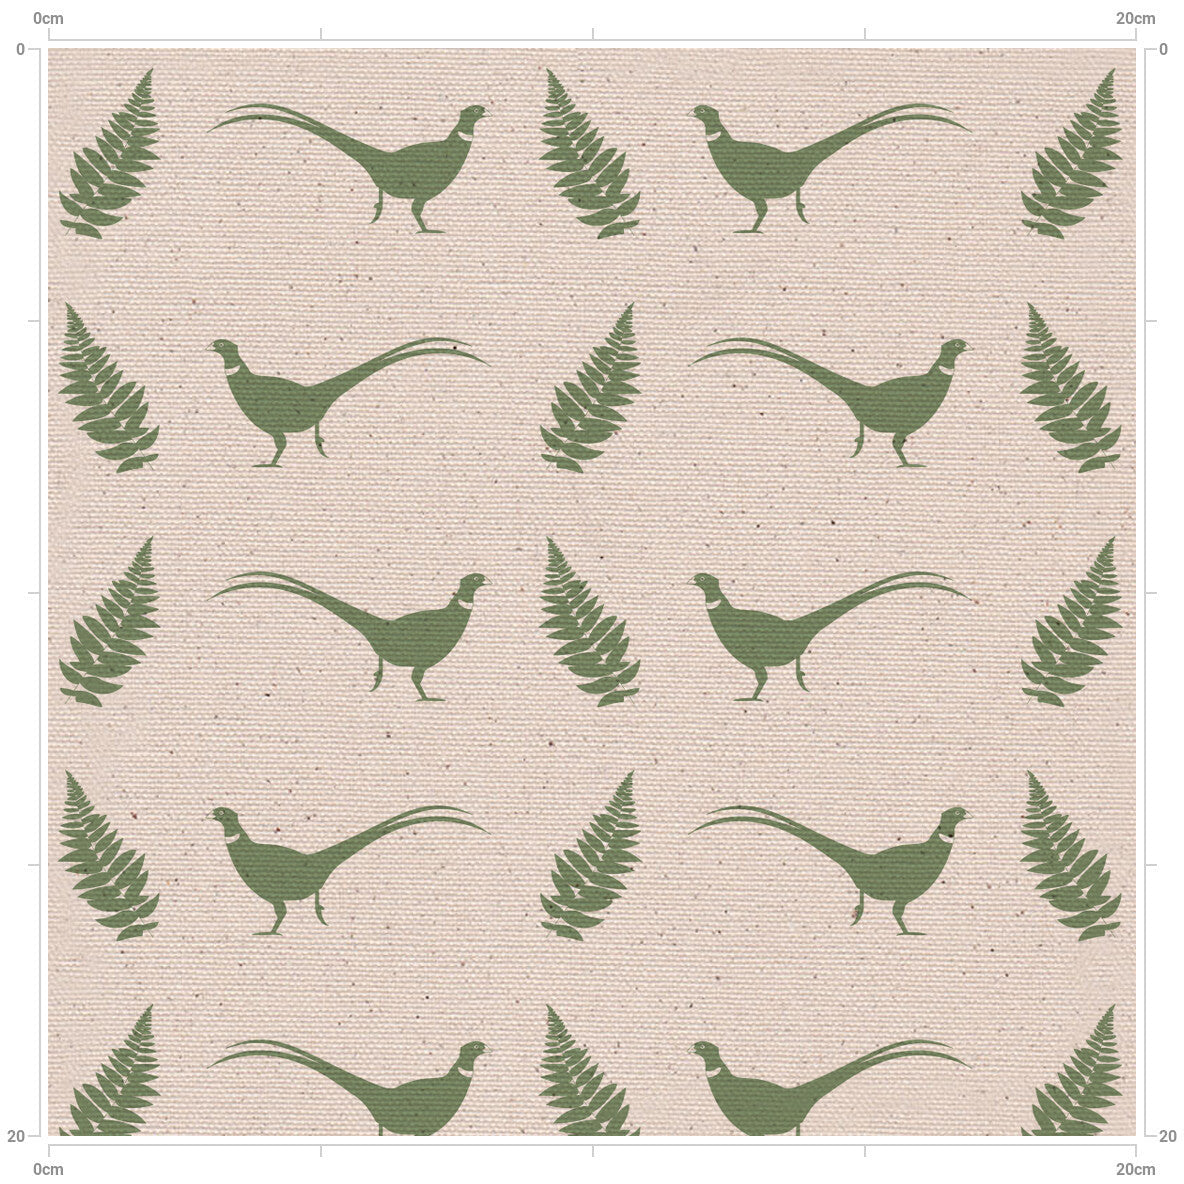 Pheasant & Fern Hovingham Green - Country inspired fabric from Yorkshire by F&B